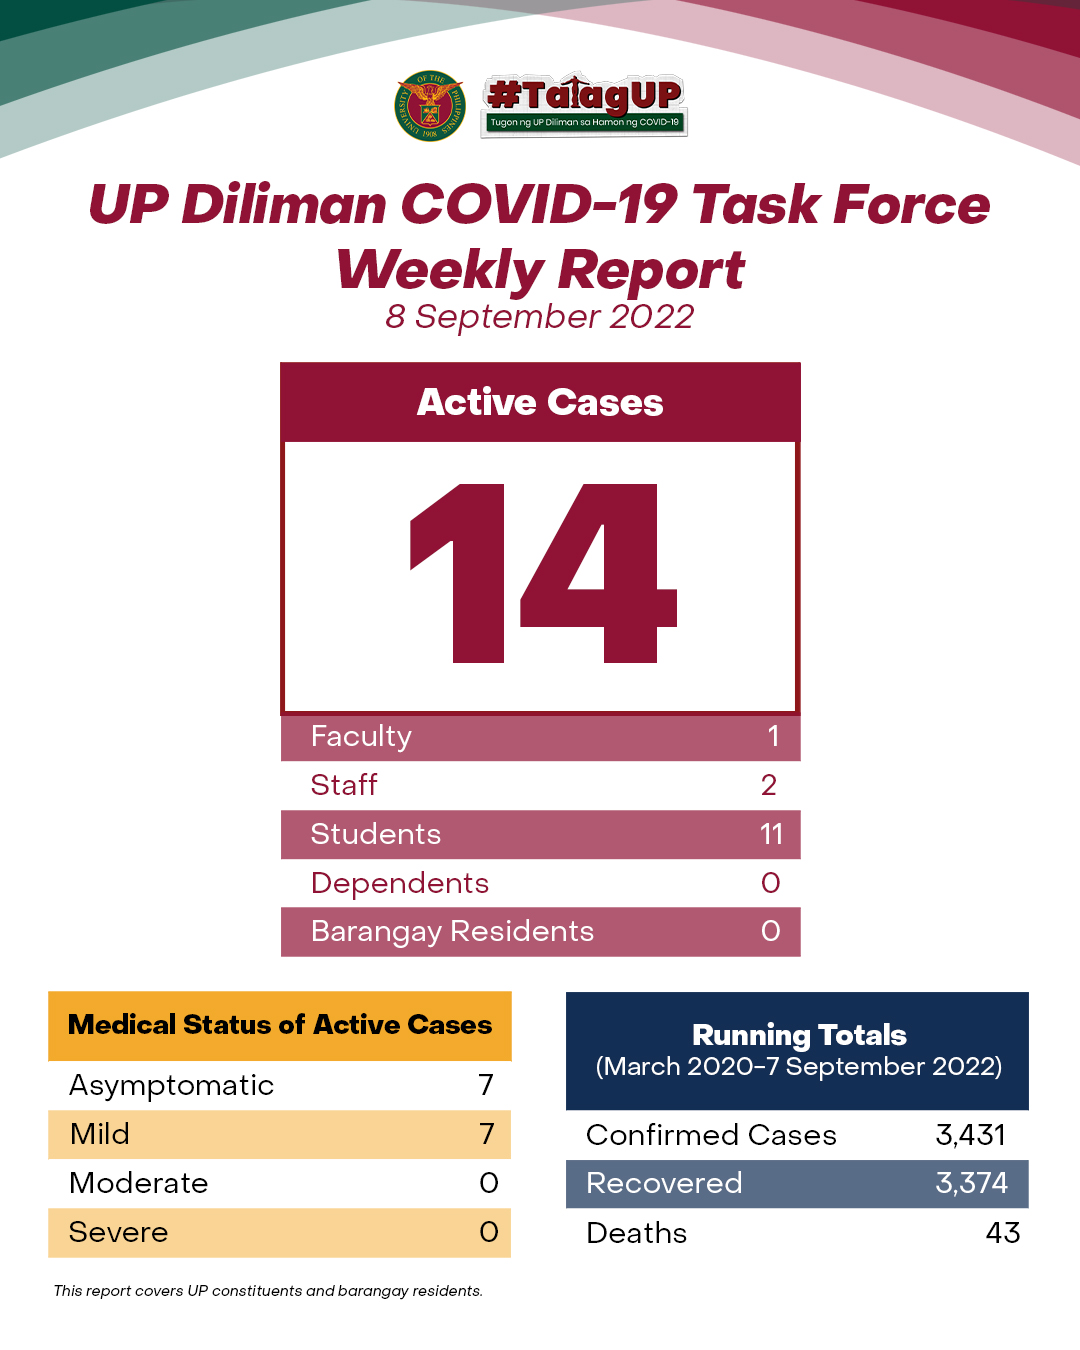 UP Diliman COVID-19 Task Force Weekly Report (8 September 2022)